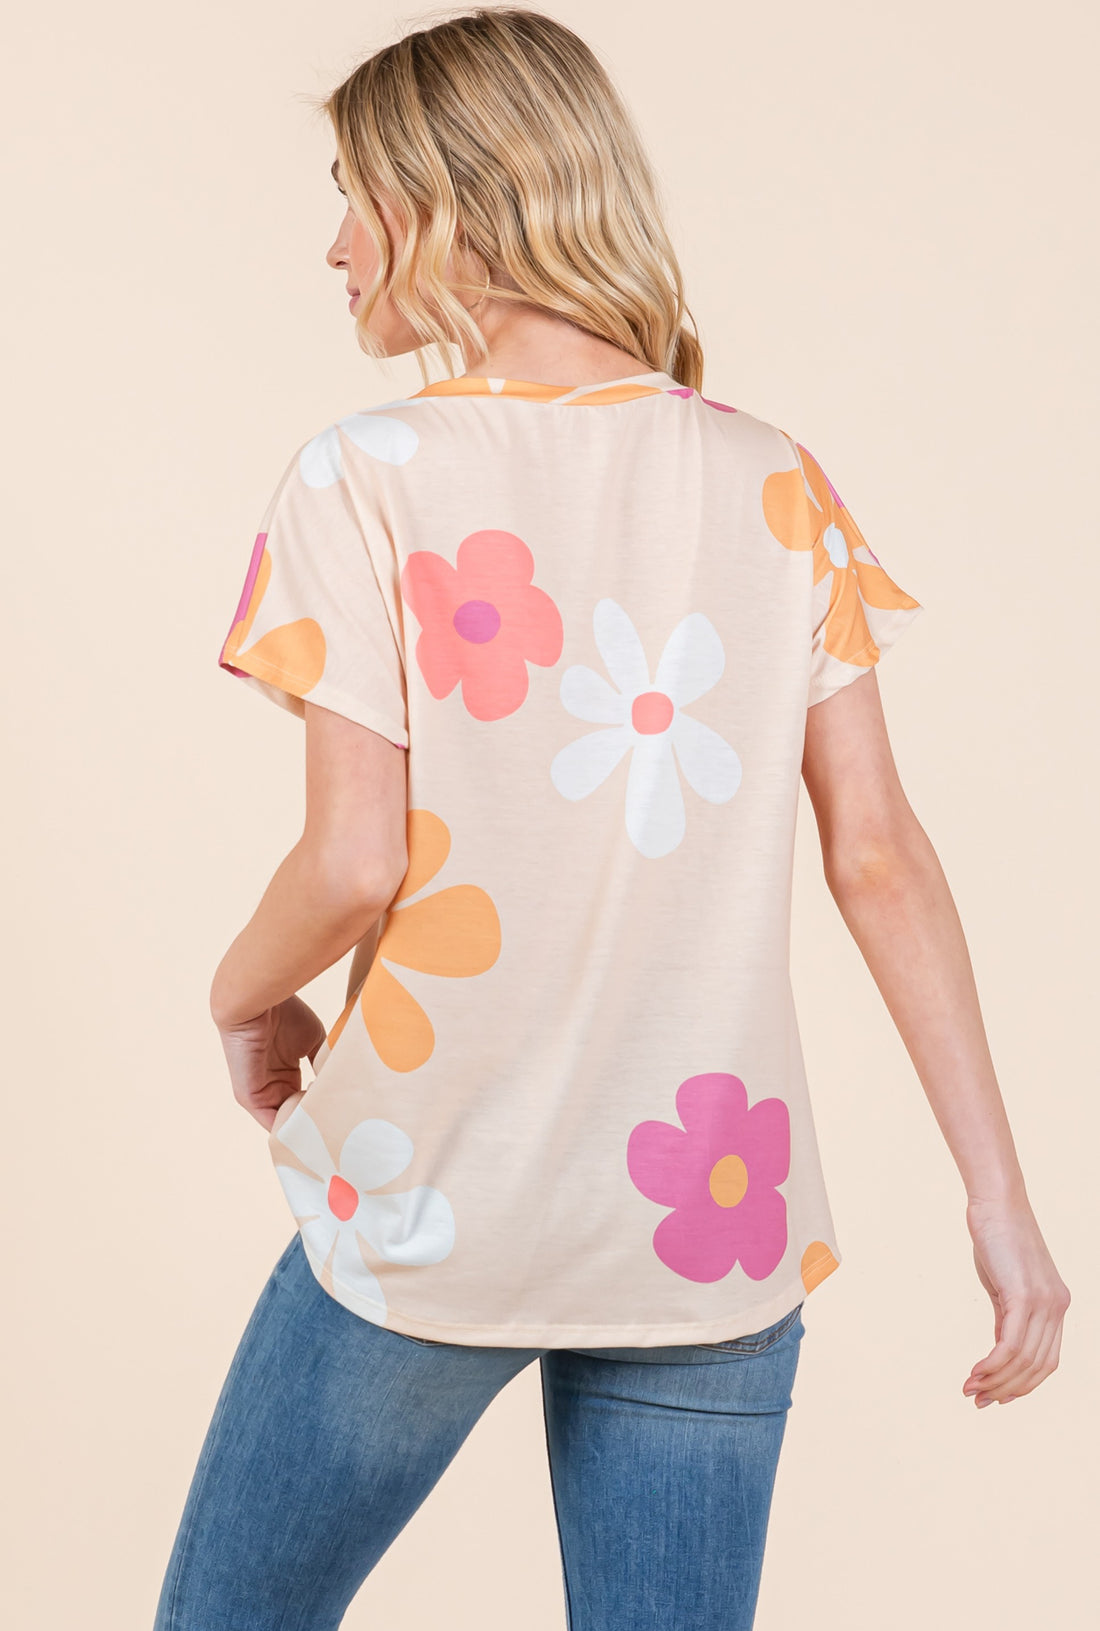 The Annie Taupe Floral Top